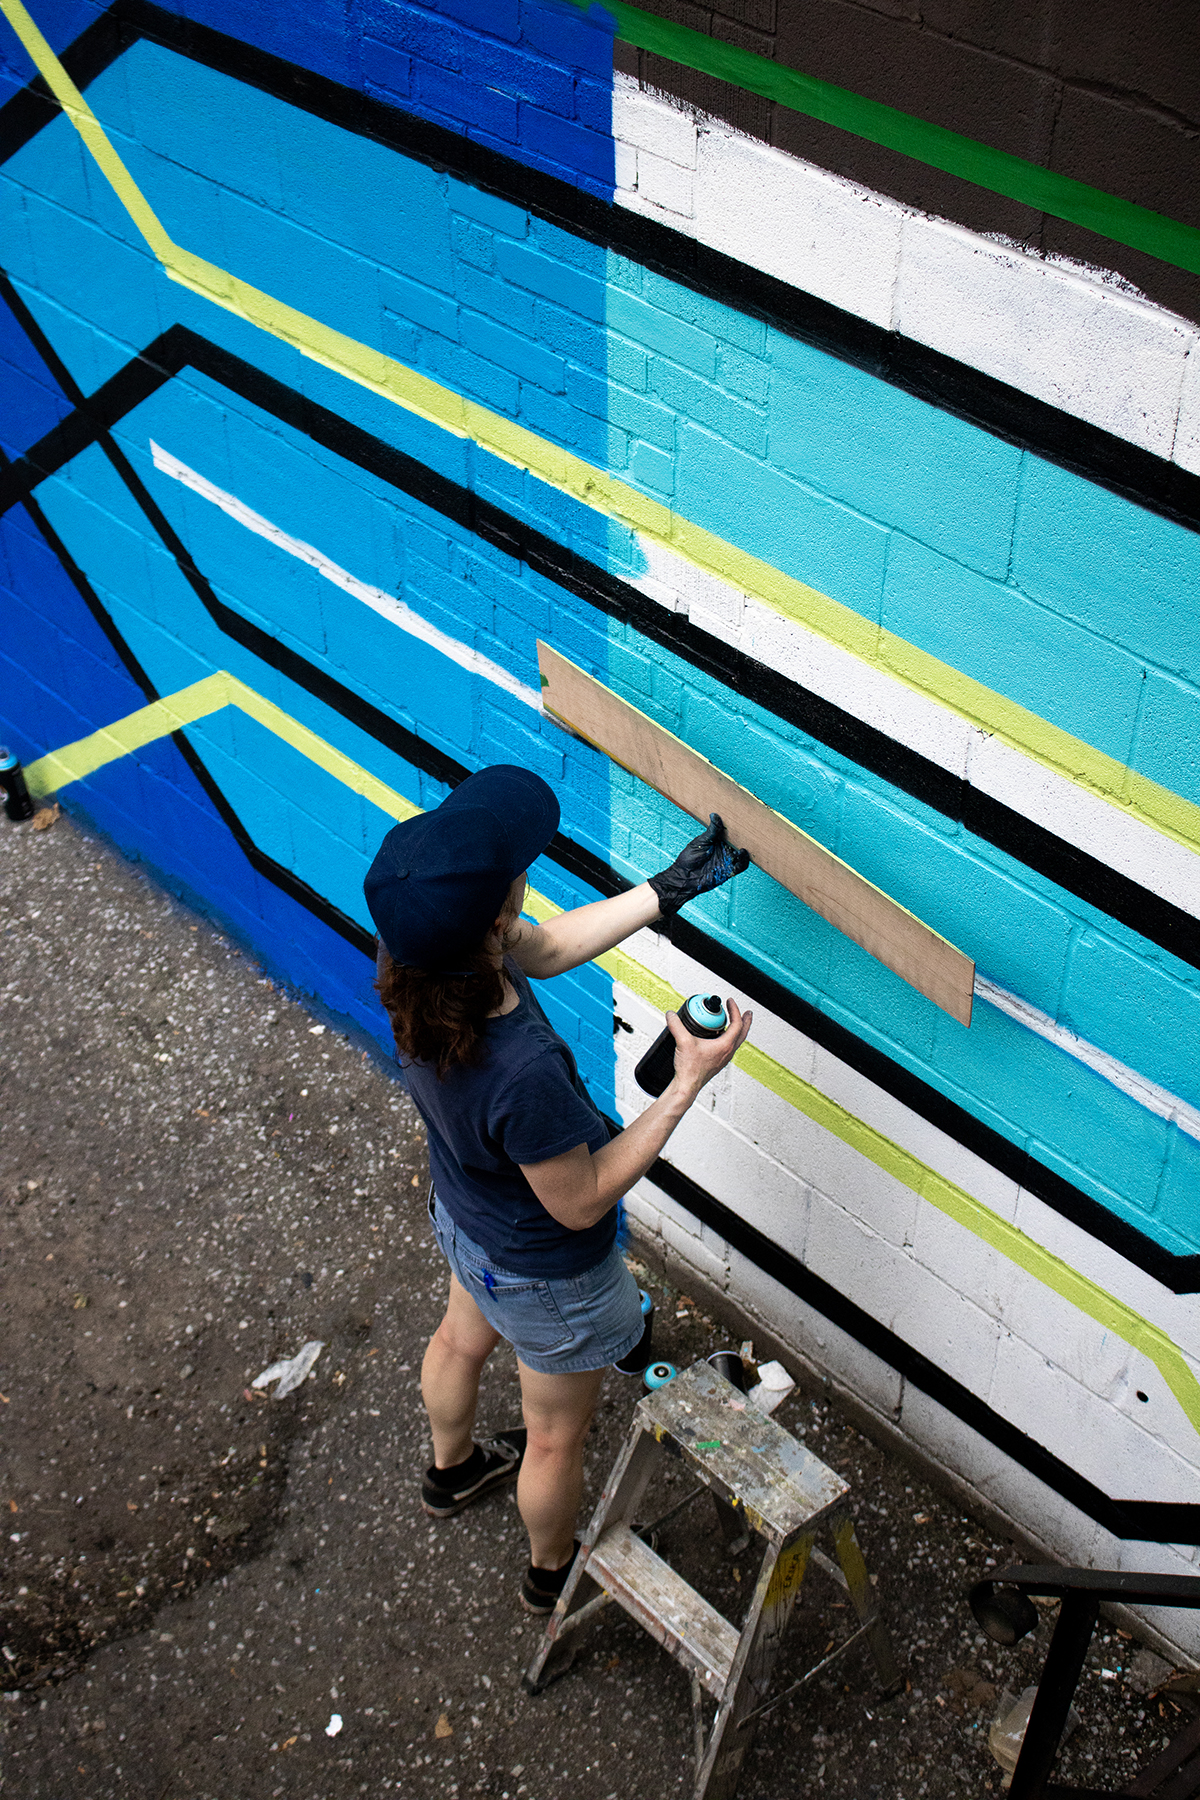 Photograph of artist Erika James painting her mural that features geometric lines and shapes in blue, teal, green and white. She is wearing a dark-colored t-shirt and baseball cap.